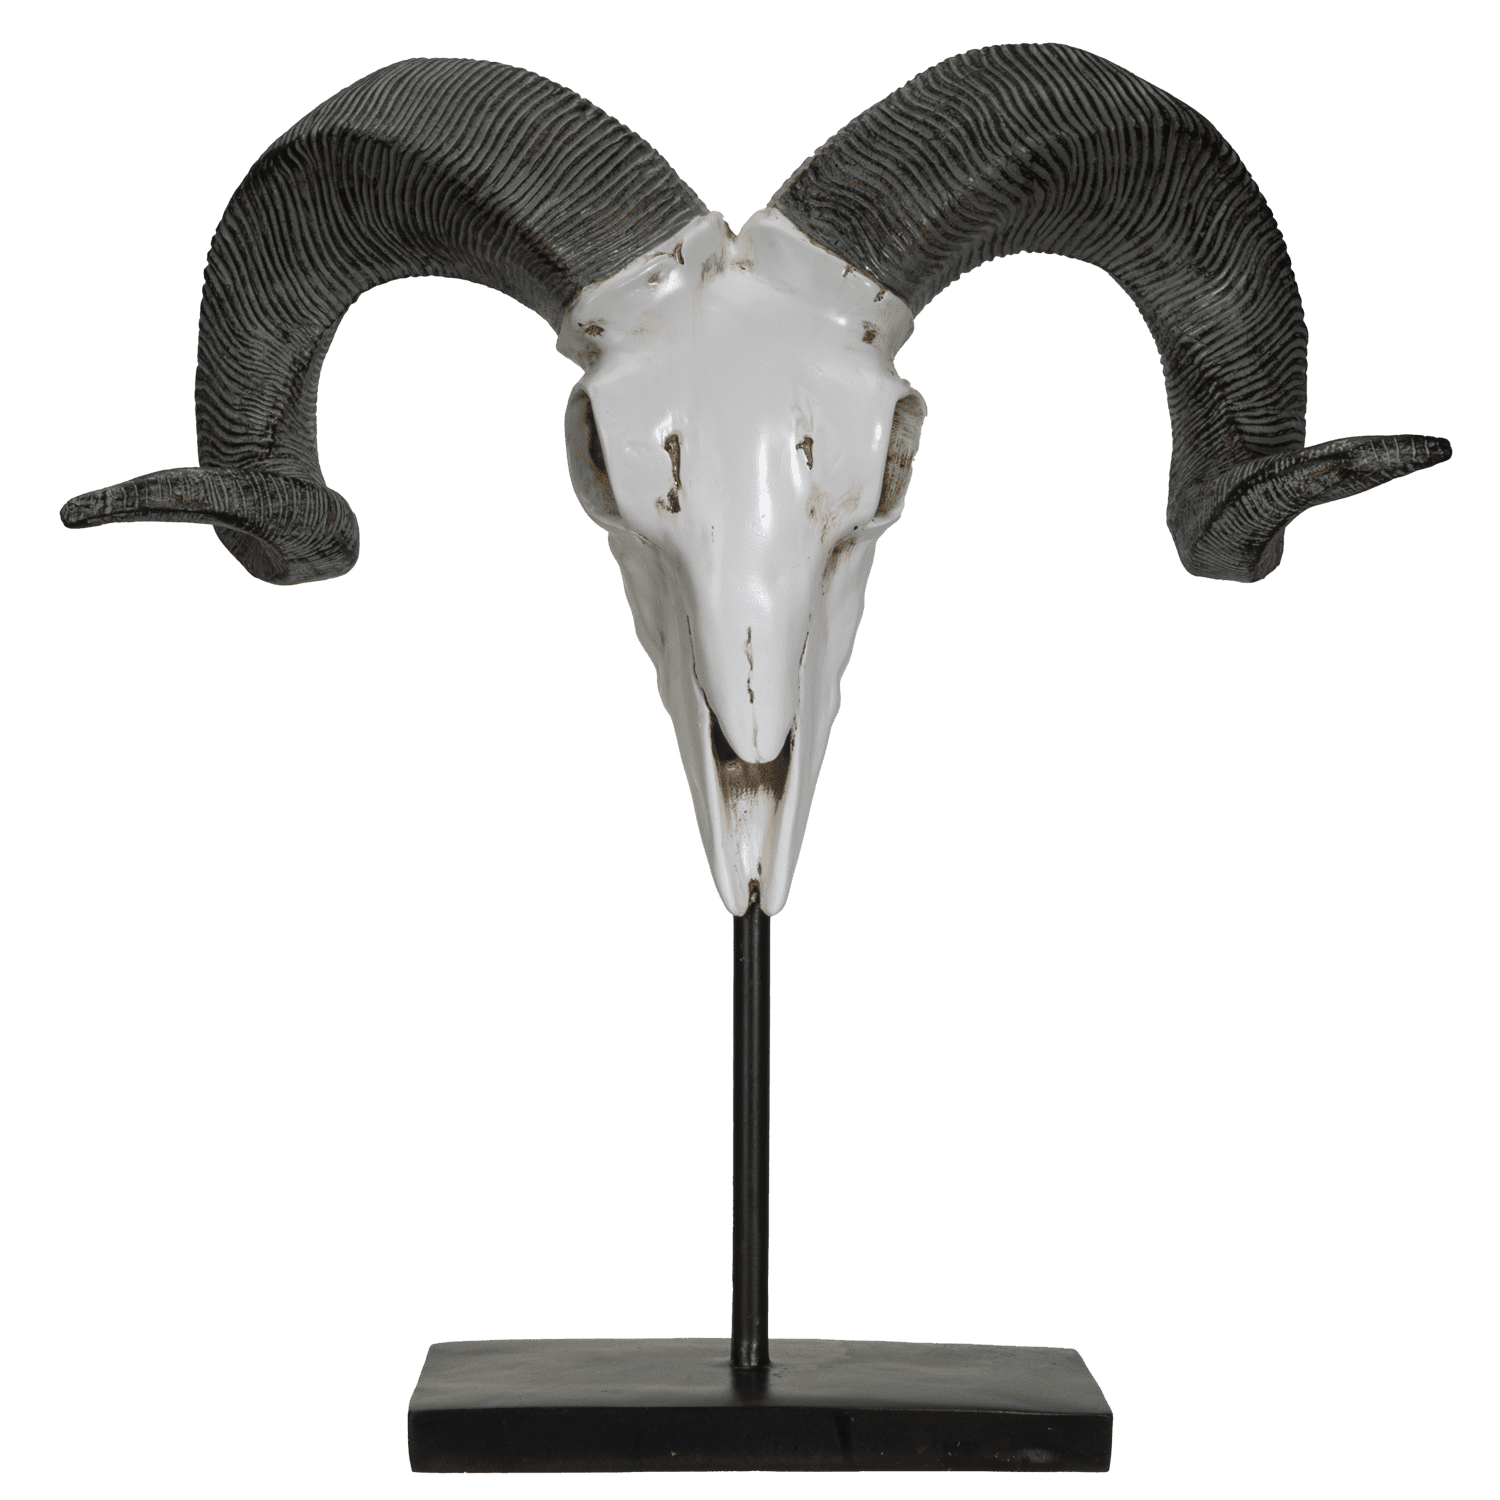 Grand 42 cm RAM Skull Hanging Wall Sculpture cheminée MOUTONS ANIMAL HEAD Ornament 